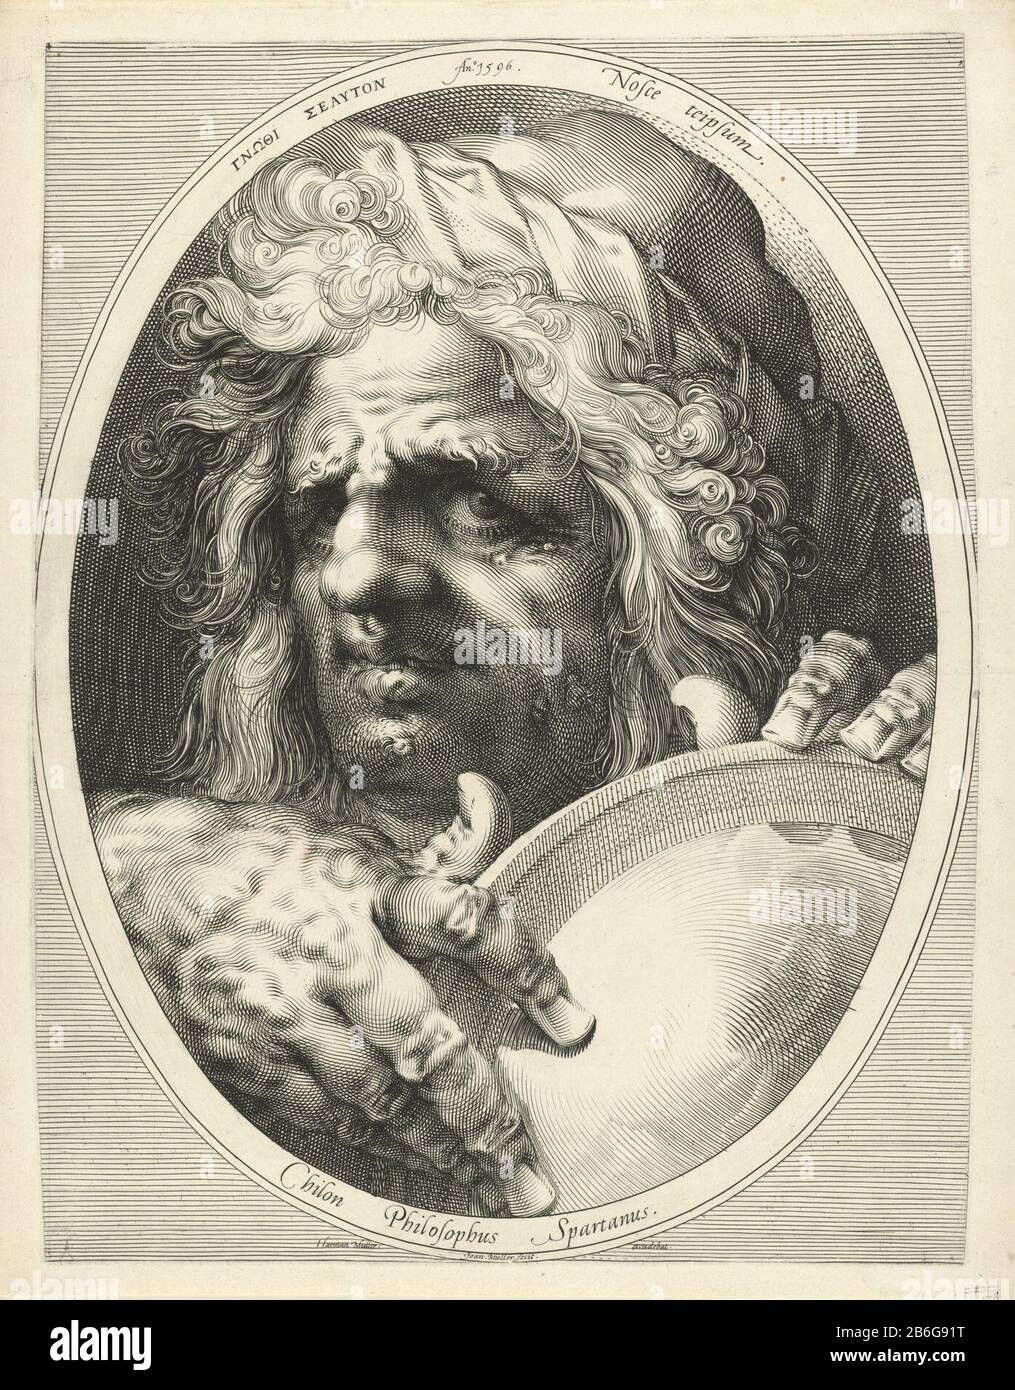 Chilon Chilon Philosophus Spartanus (title object) Chilon of Sparta, one of the seven sages of Greece, the spectator holds up a mirror. Top on the list are saying 'Know thyself' in Latijn. Manufacturer : printmaker Jan Harmensz. Muller (listed building) in its design: Jan Harmensz. Muller Publisher: Harmen Jansz Muller (listed property) Place manufacture: Amsterdam Date: 1596 Physical features: car material: paper Technique: engra (printing process) Dimensions: plate edge: H 480 mm × W 370 mm Subject: the seven wise men of Greece: Bias, Chilon, Cleobulus, Periander (alternatively Myson), Pitta Stock Photo